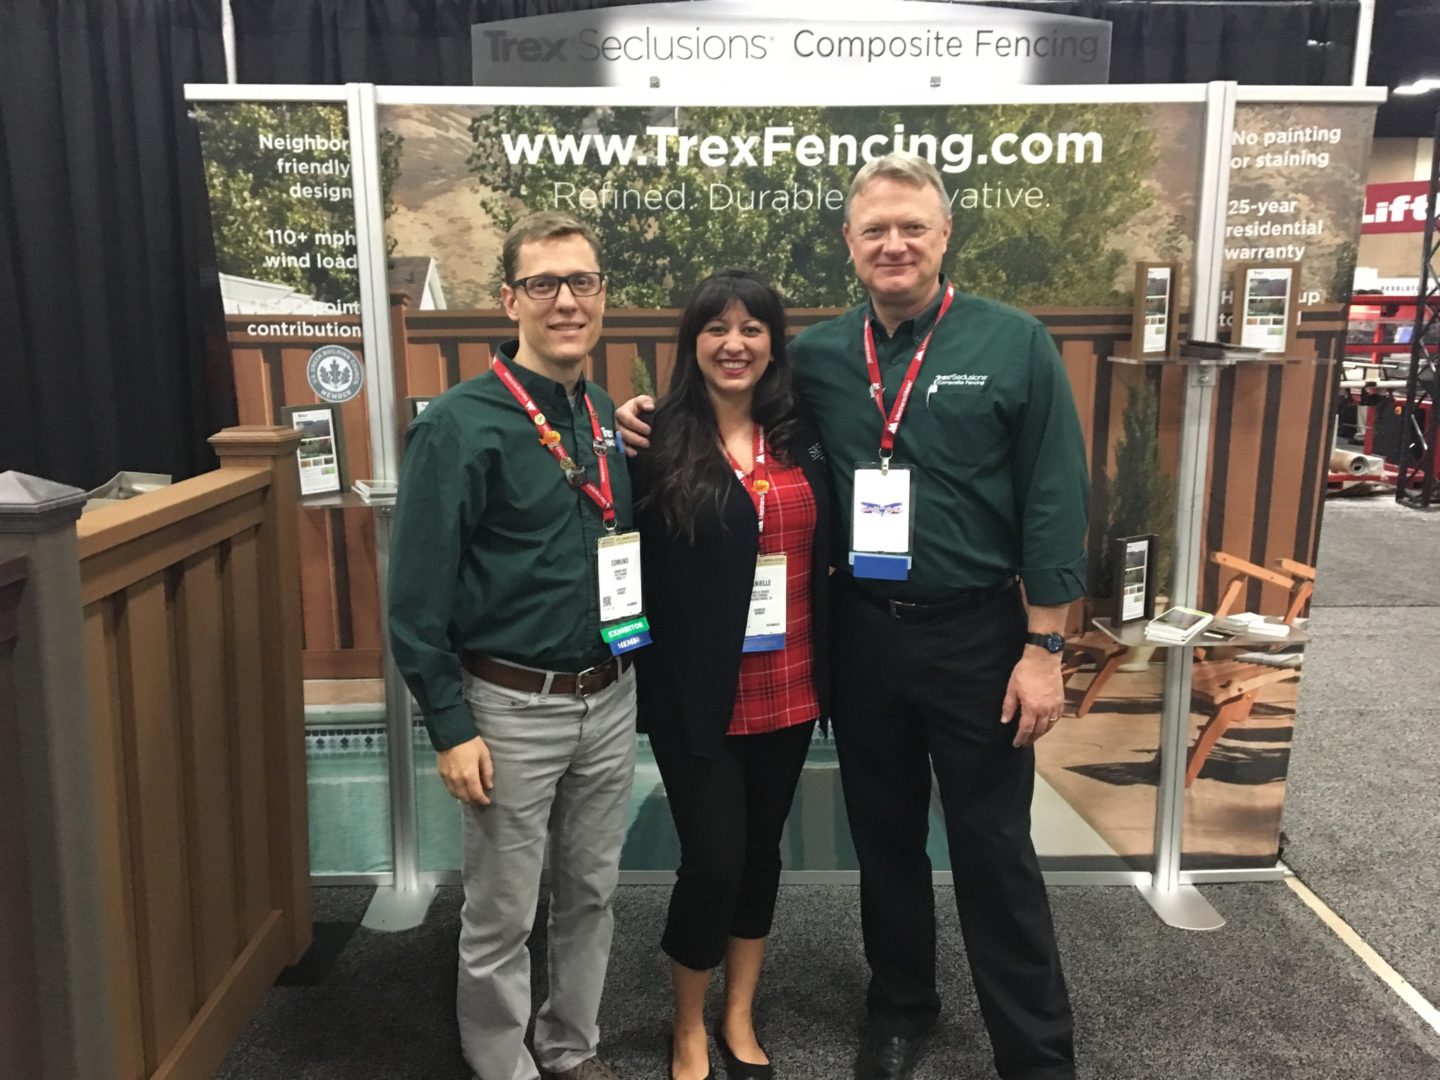 Staff members in the Trex Fencing booth at Fencetech 2017 in San Antonio